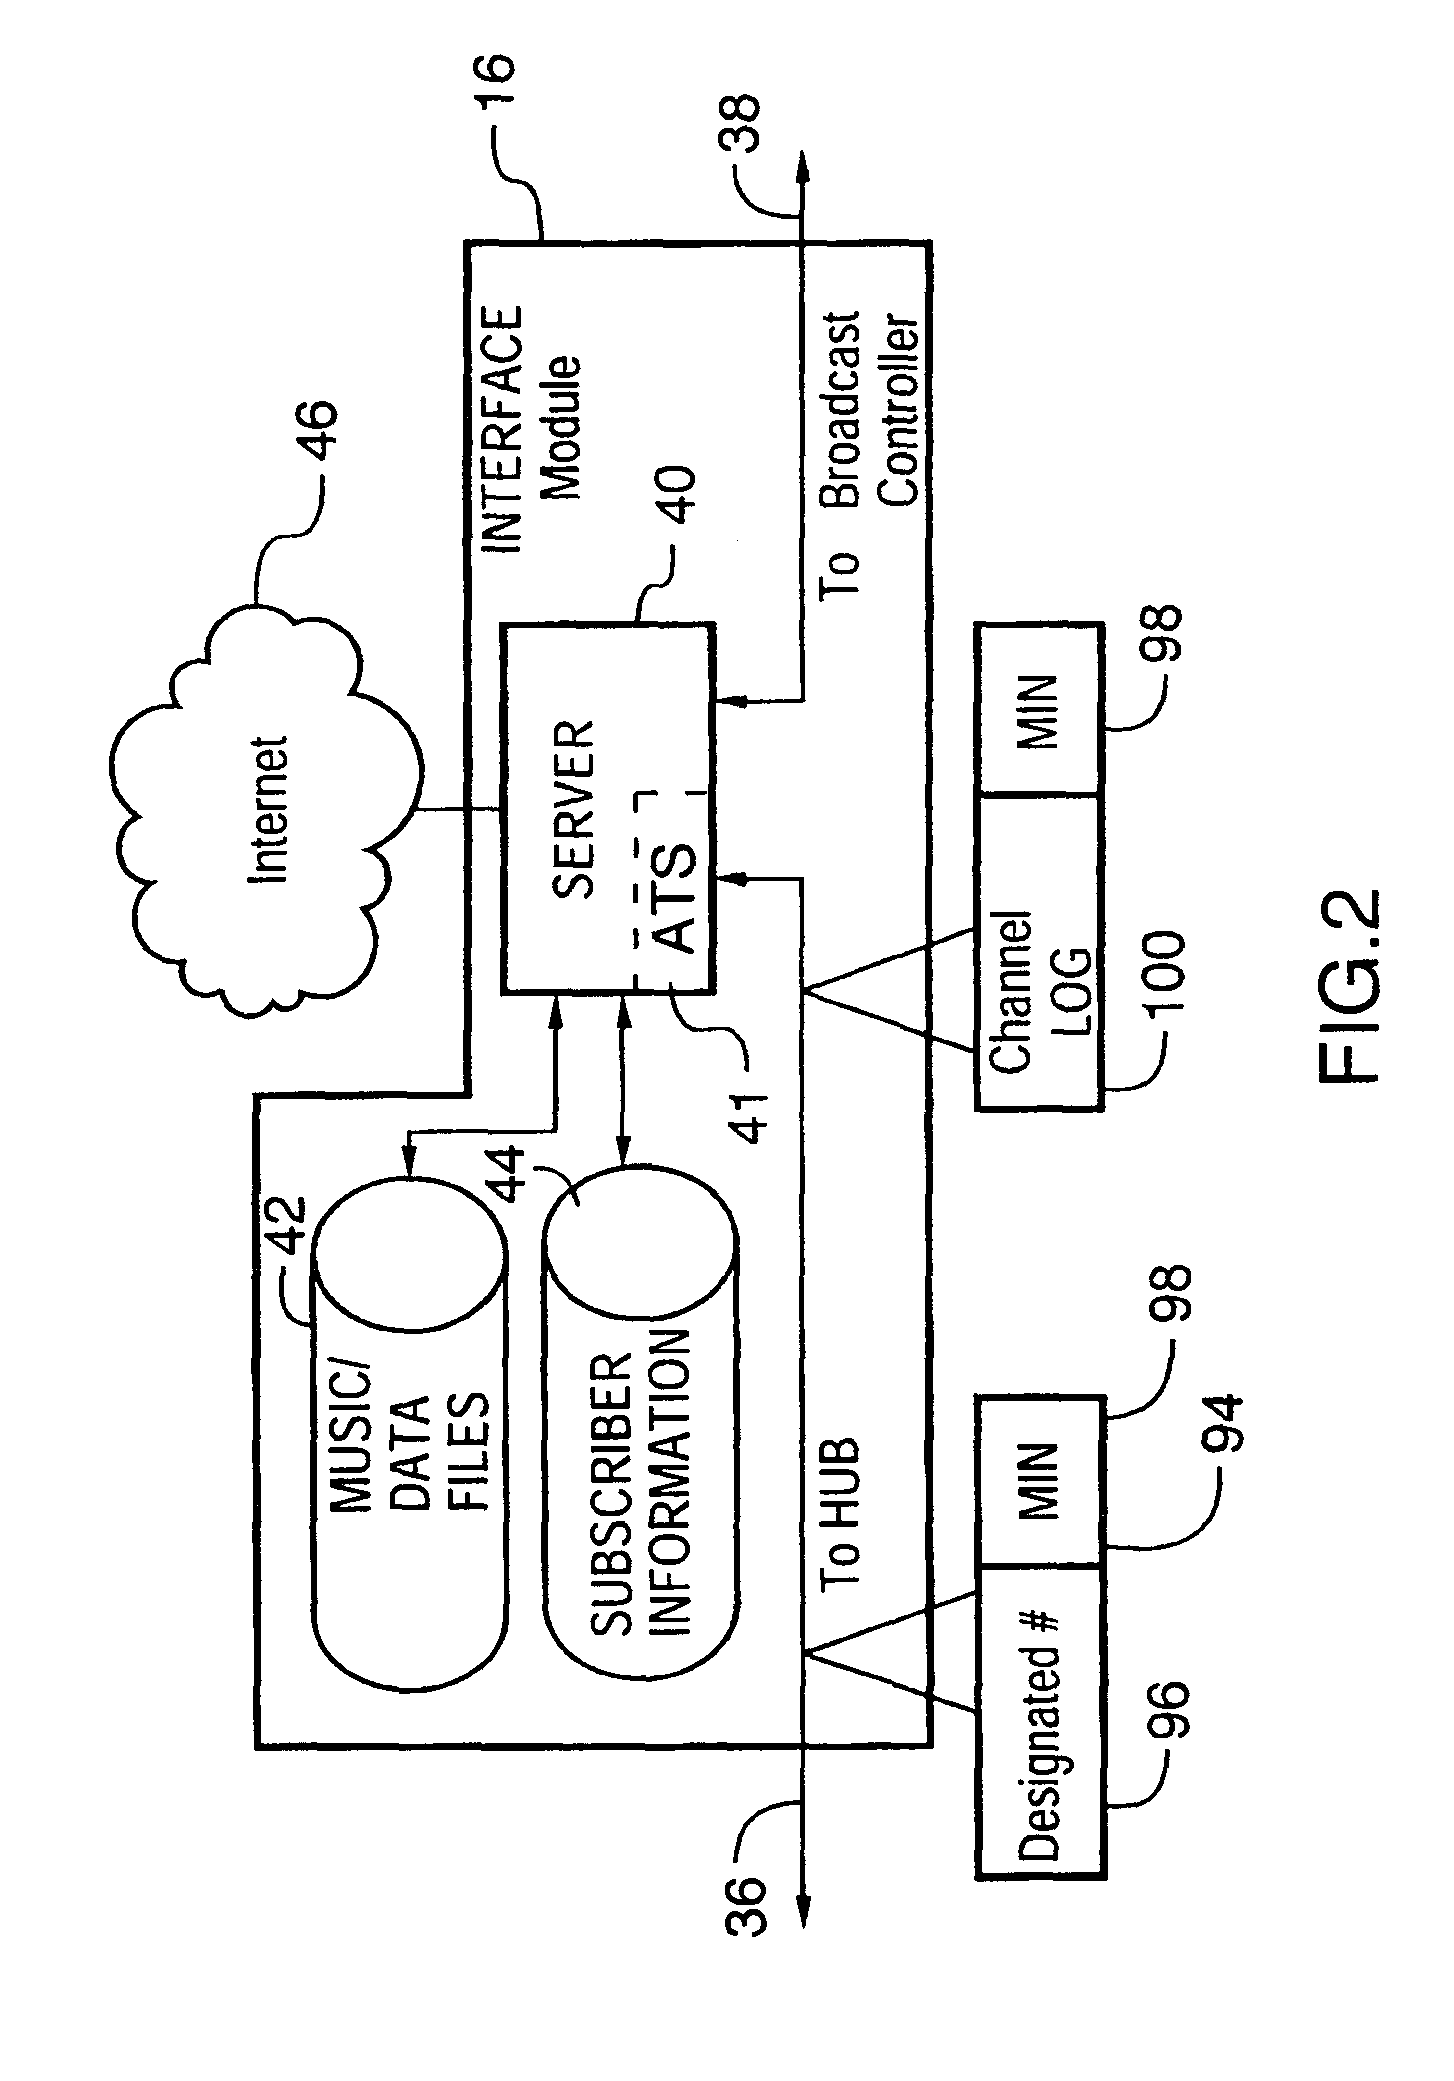 Interactive data broadcasting system